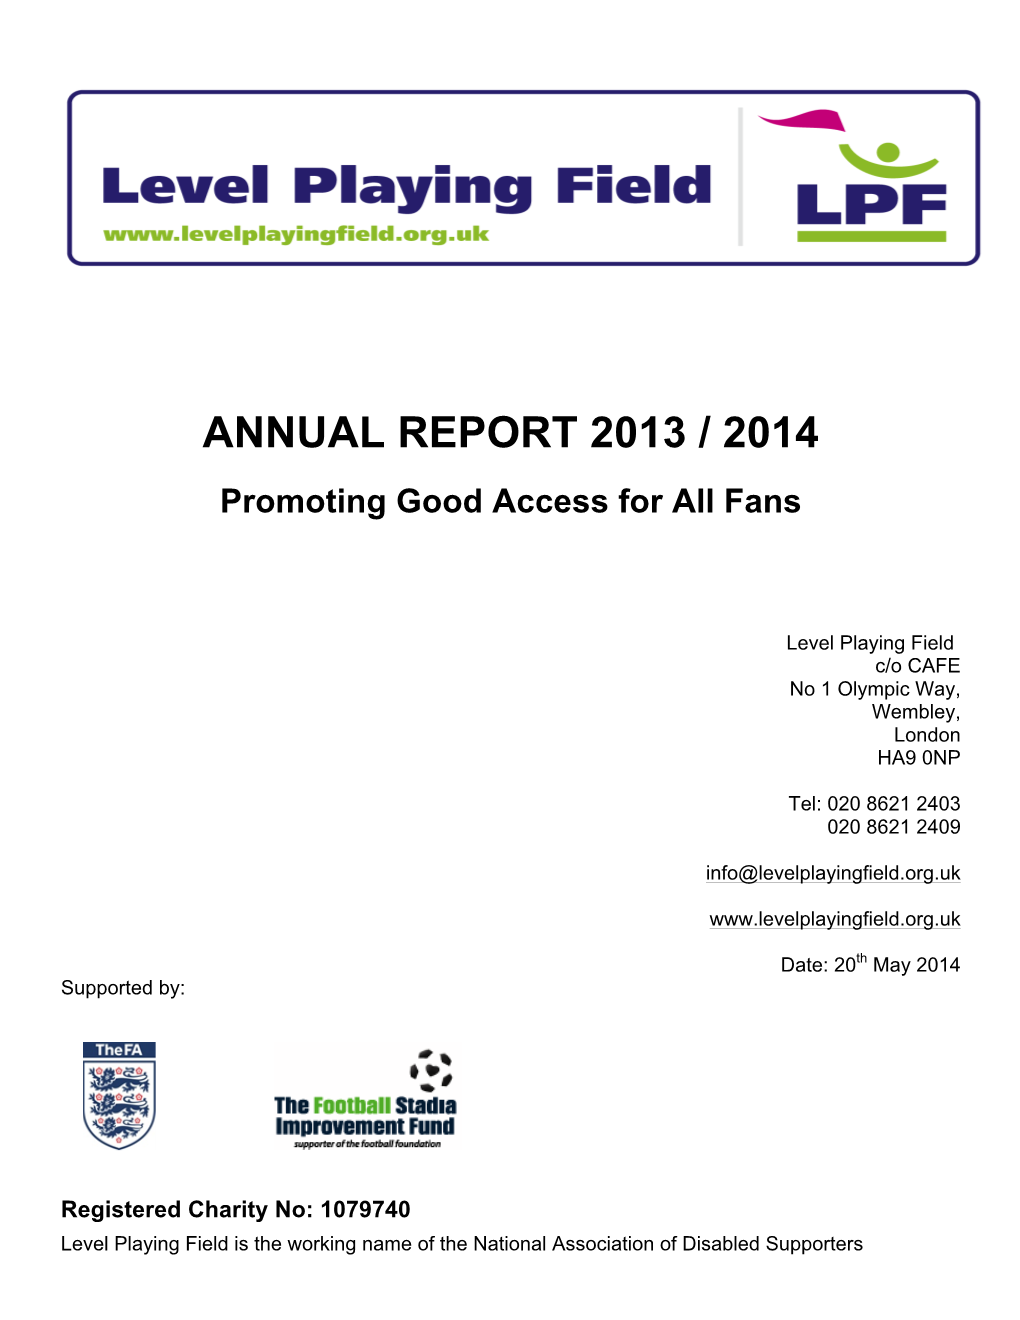 ANNUAL REPORT 2013 / 2014 Promoting Good Access for All Fans